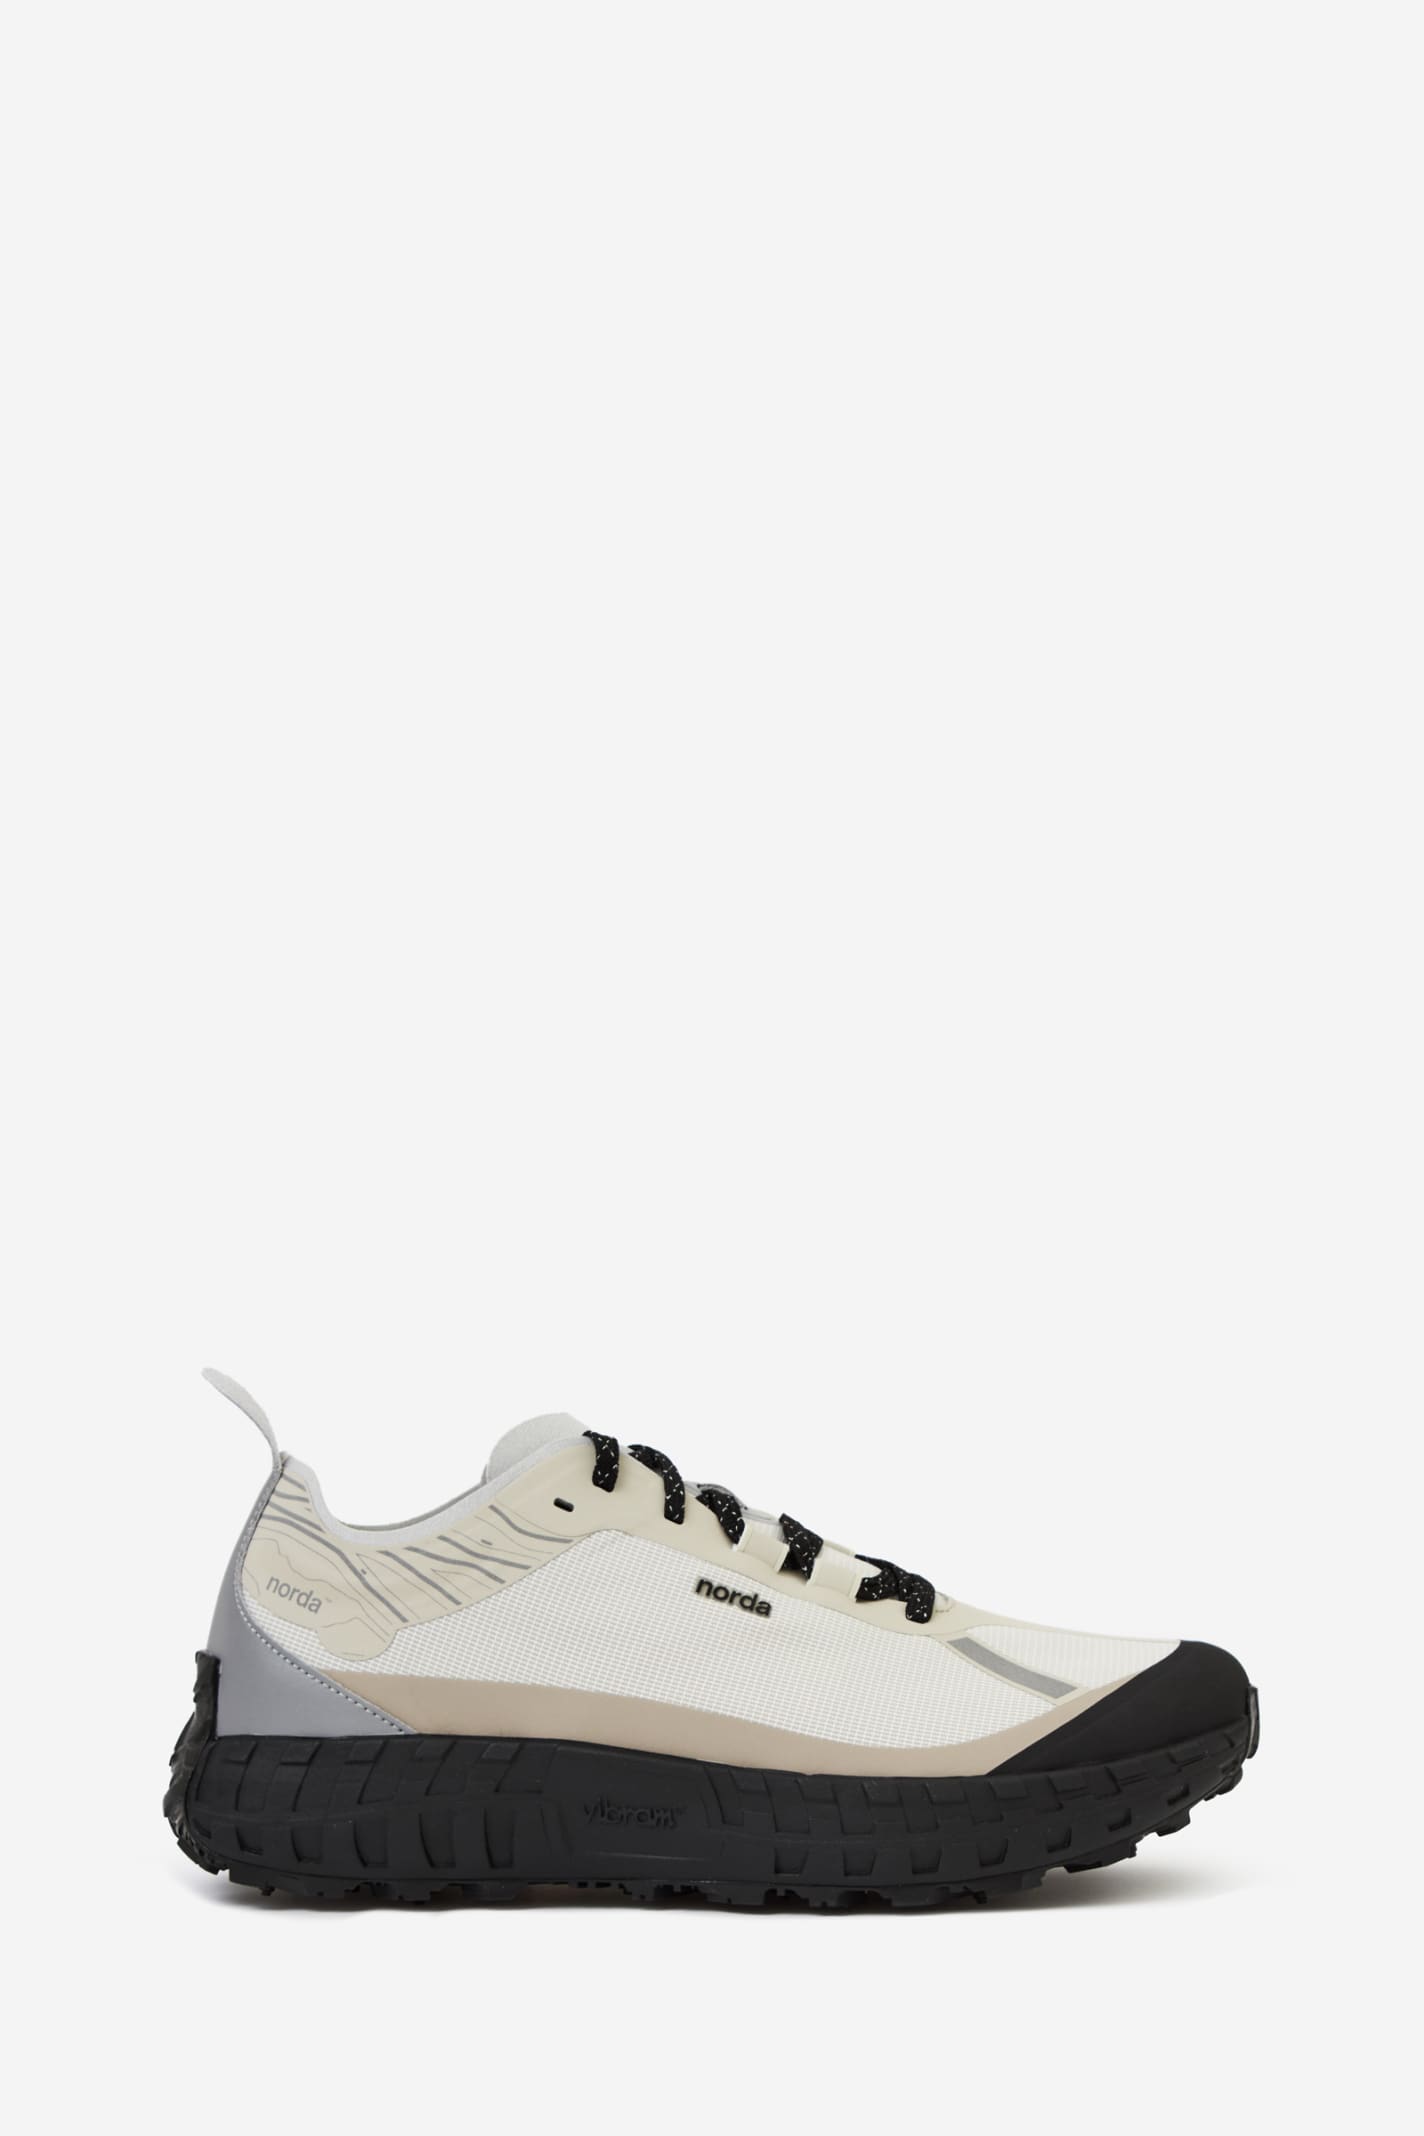 Norda The 001 M Sneakers In Ivory